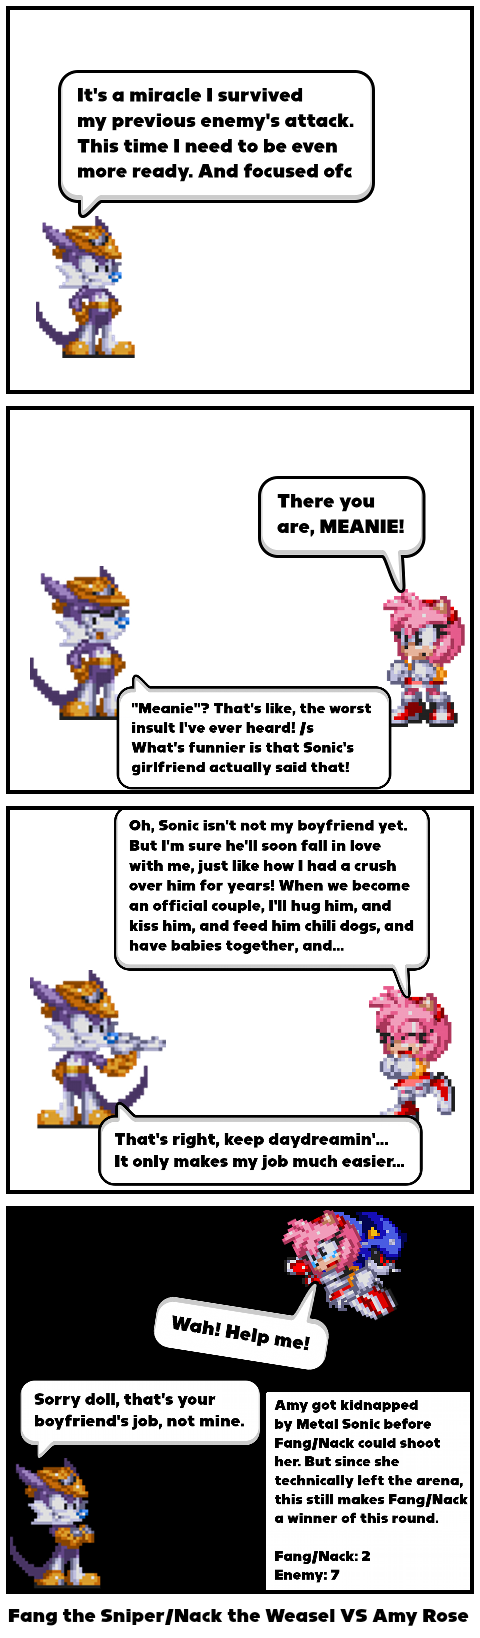 Fang the Sniper/Nack the Weasel VS Amy Rose